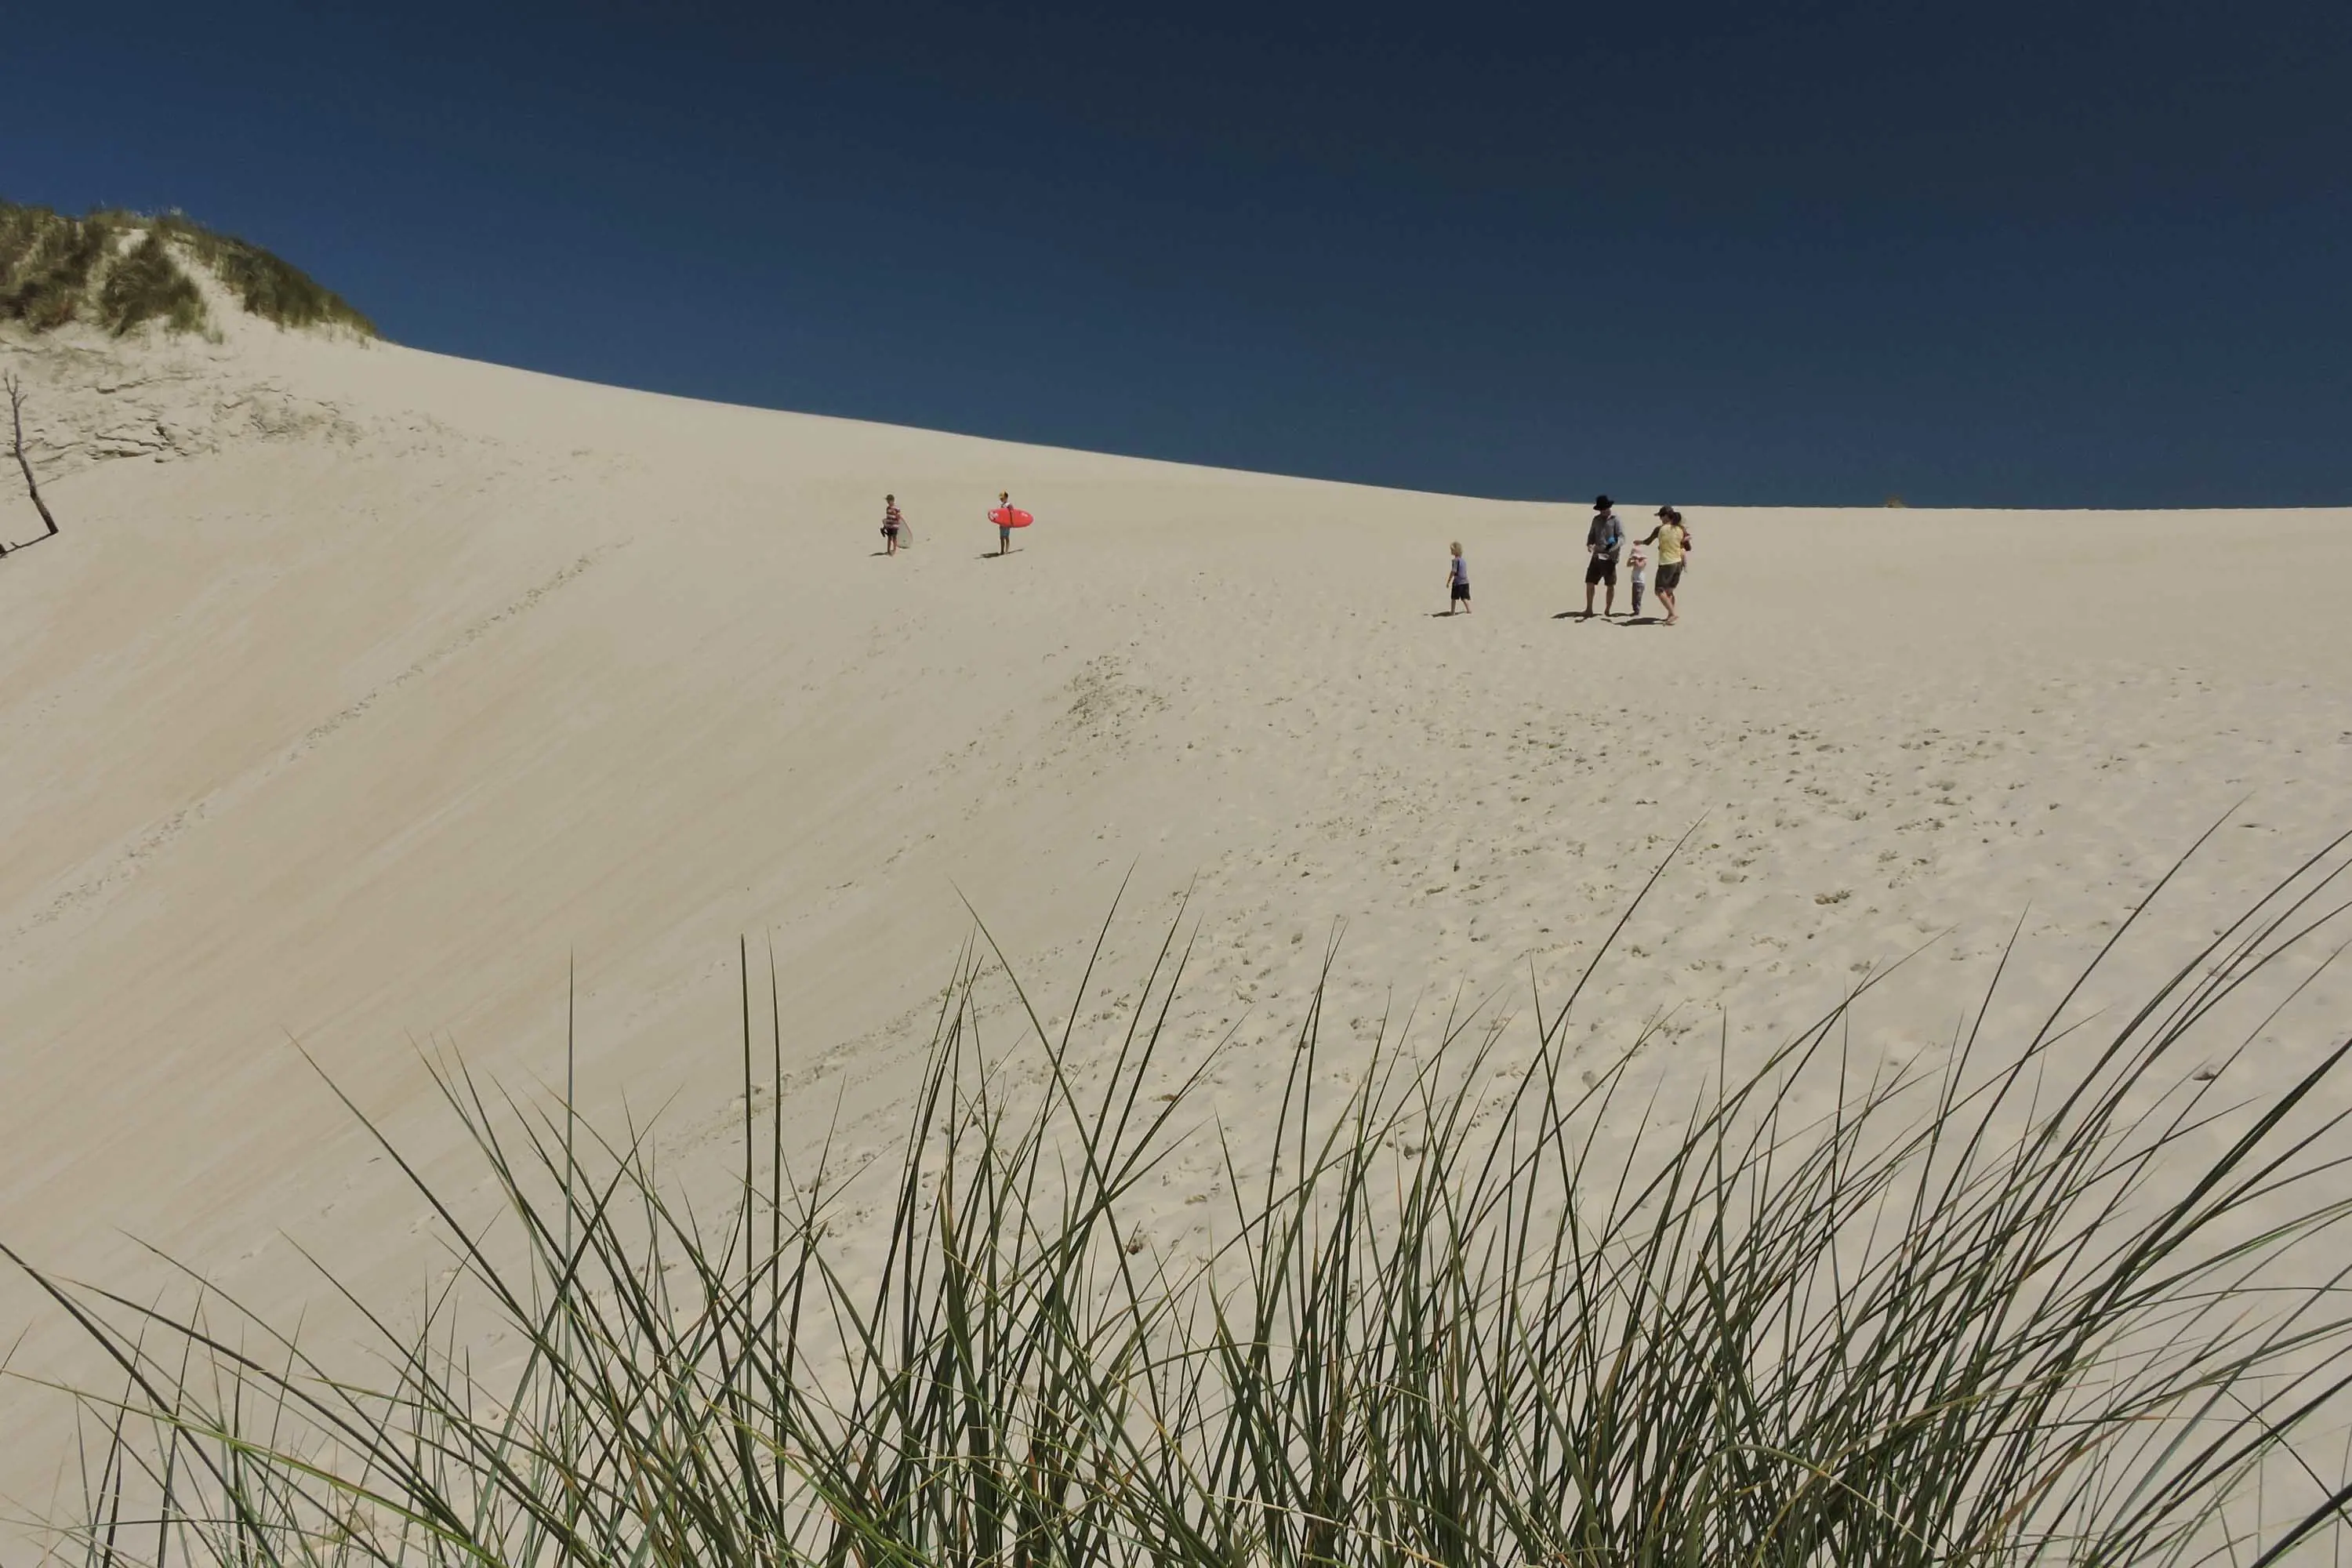 A young family stand at the top of a tall sand dune on a fine day. Two young children stand nearby holding boards for sliding down the sand.